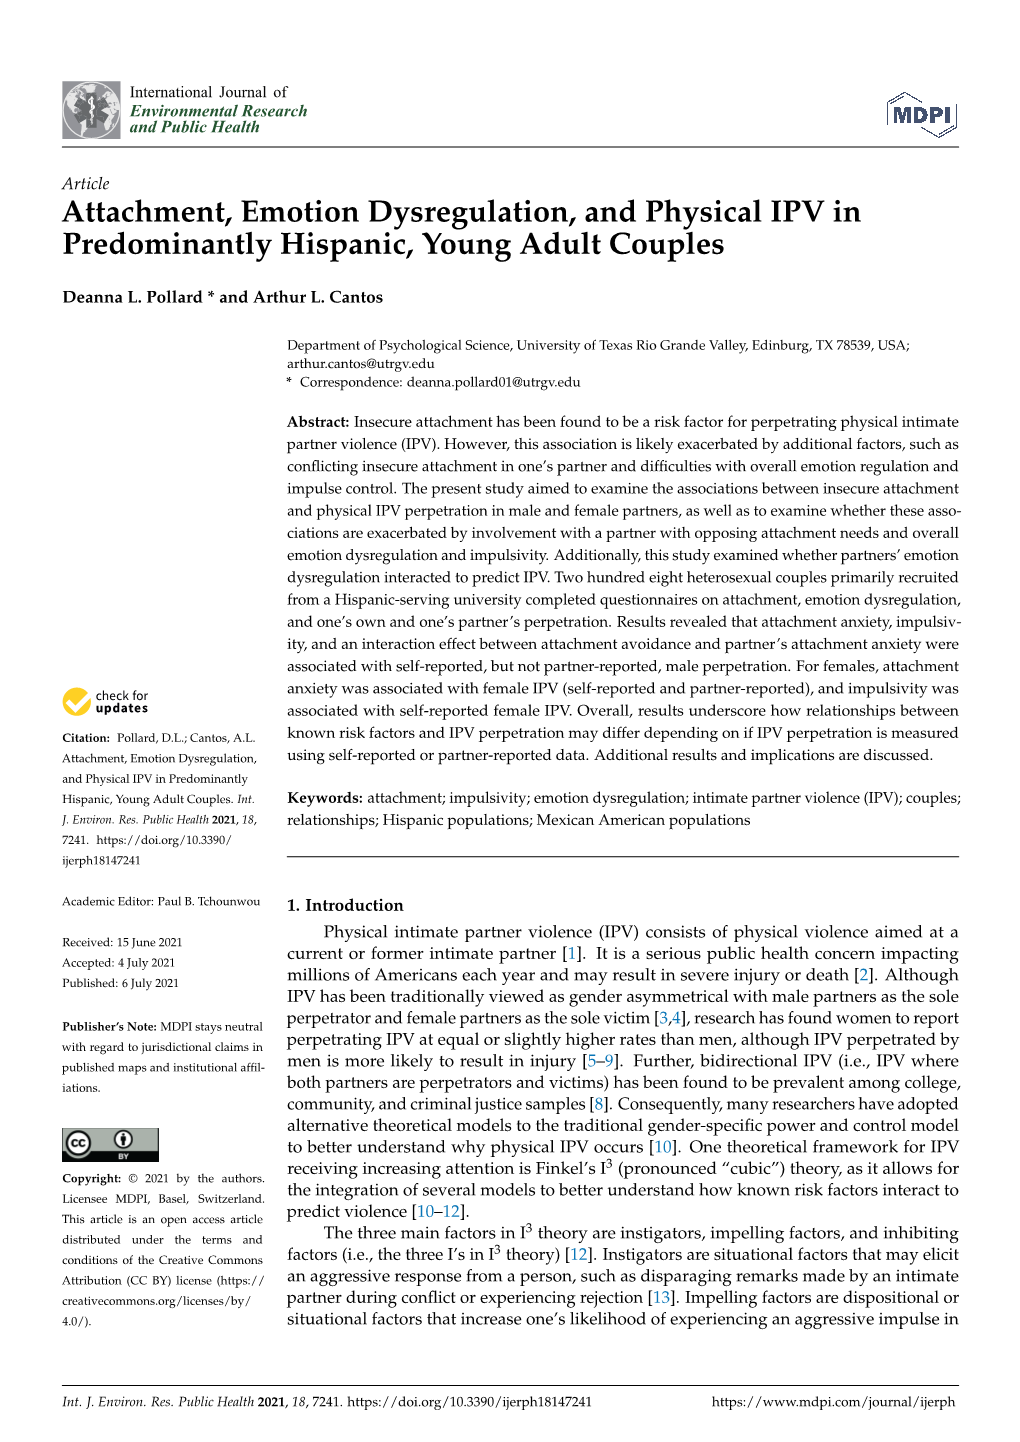 Attachment, Emotion Dysregulation, and Physical IPV in Predominantly Hispanic, Young Adult Couples